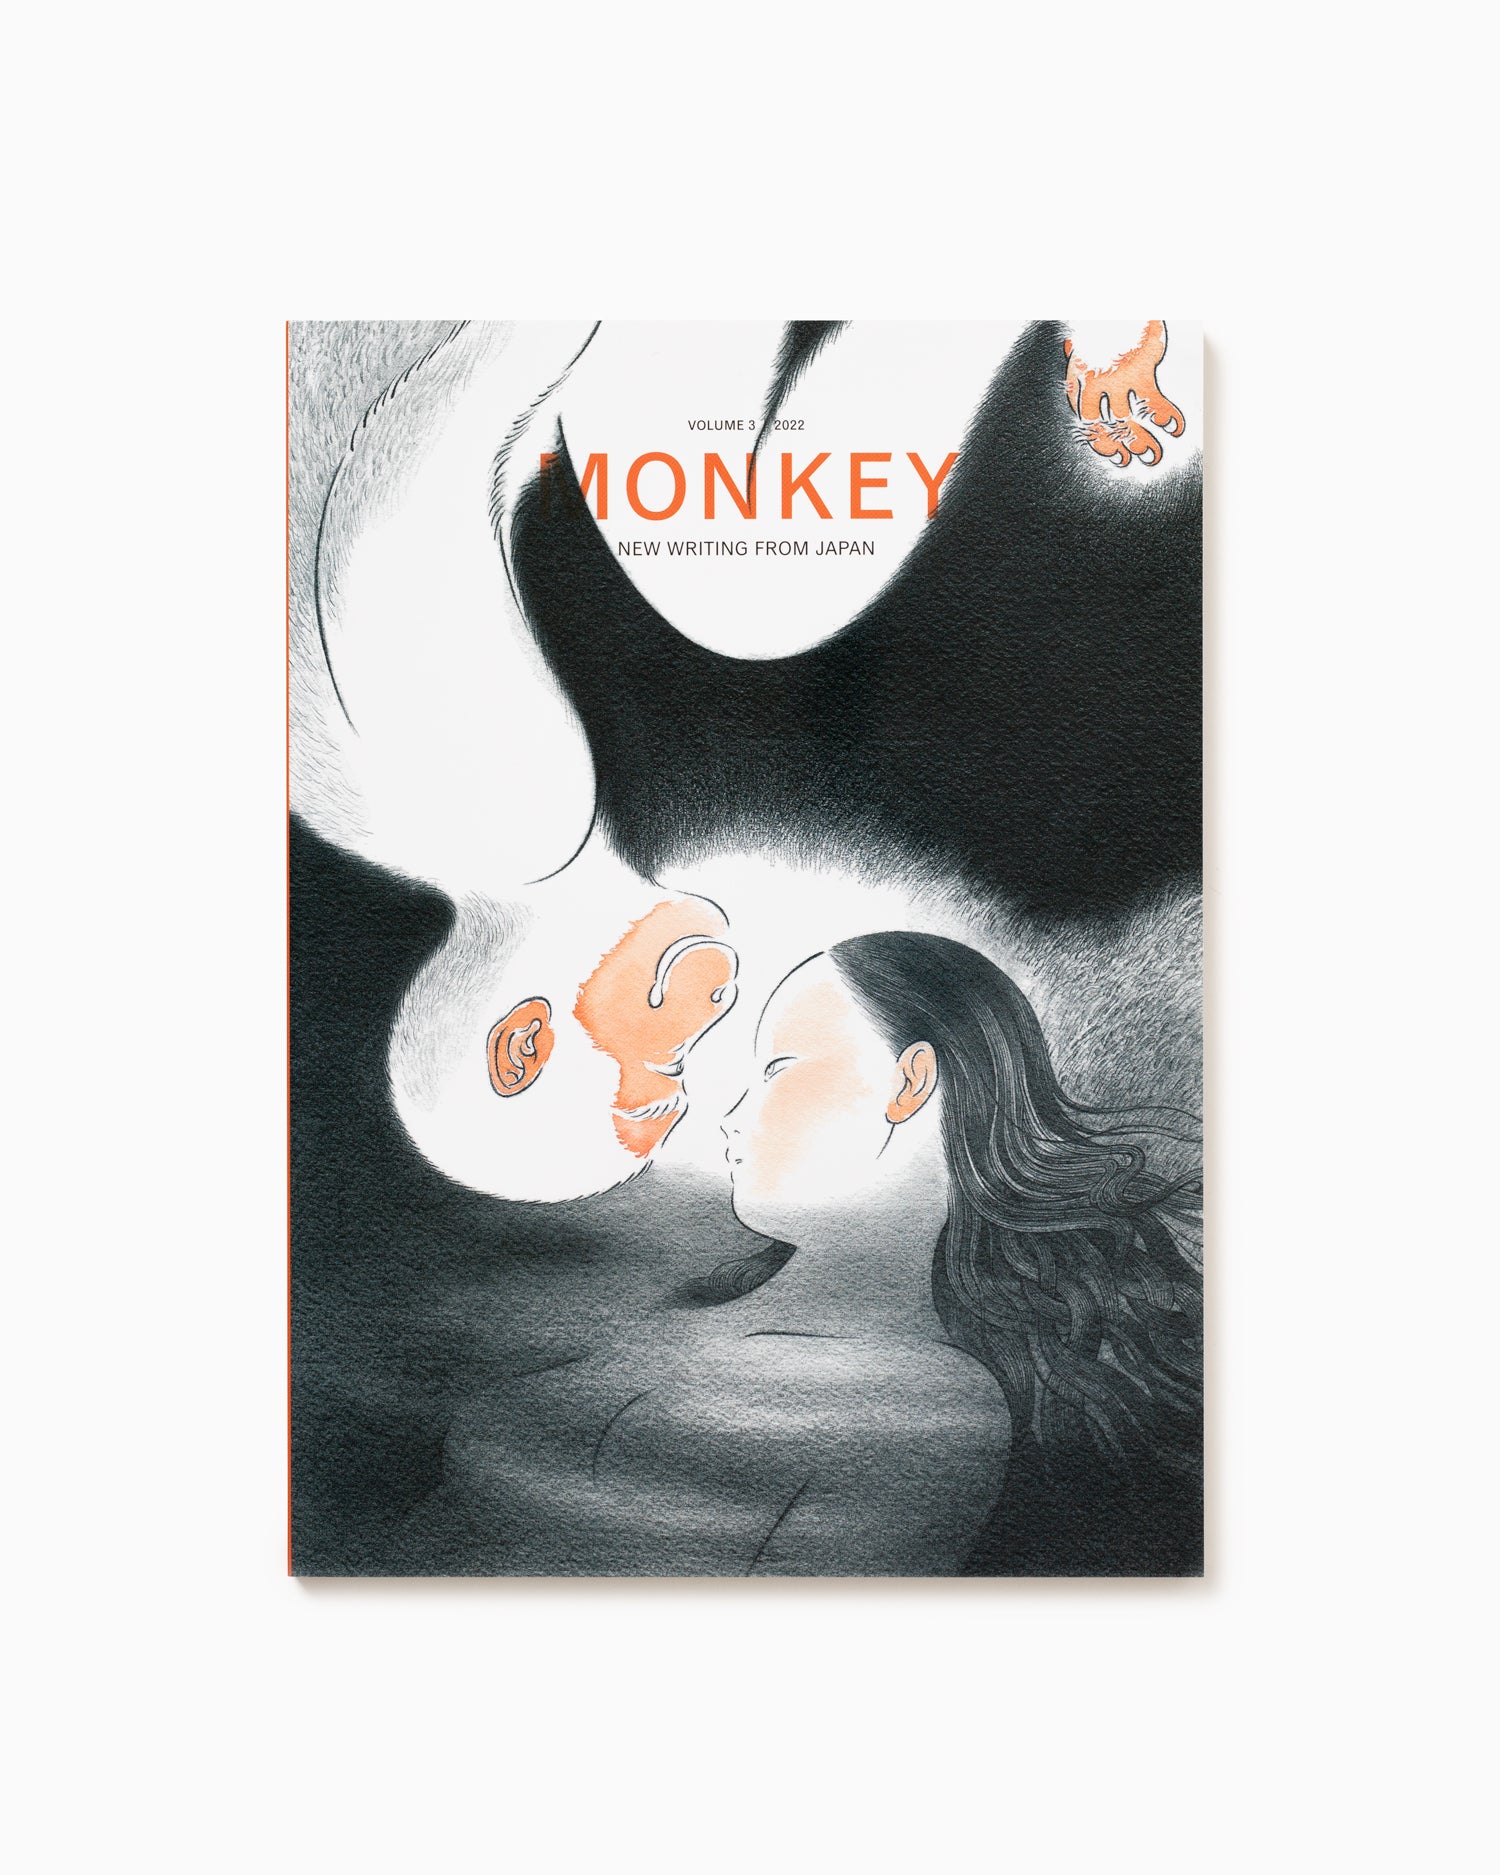 MONKEY New Writing From Japan